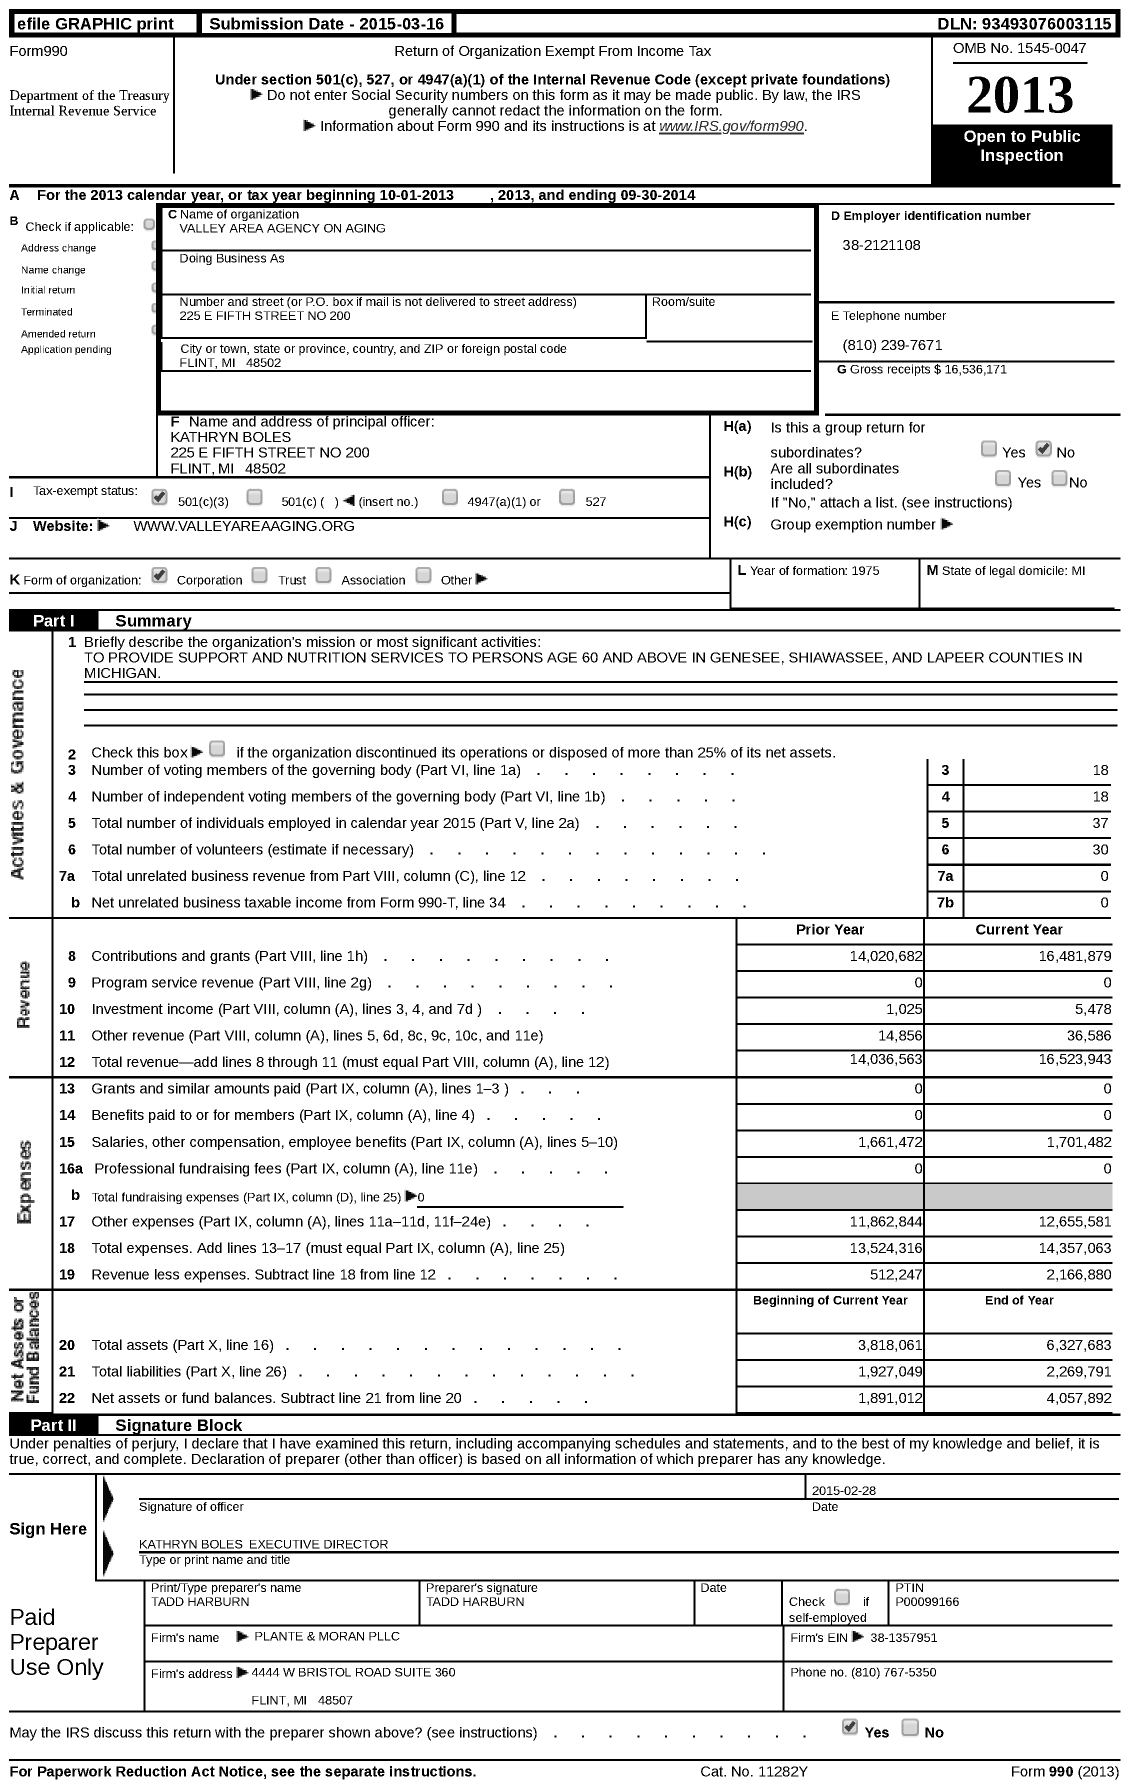 Image of first page of 2013 Form 990 for Valley Area Agency on Aging (VAAA)